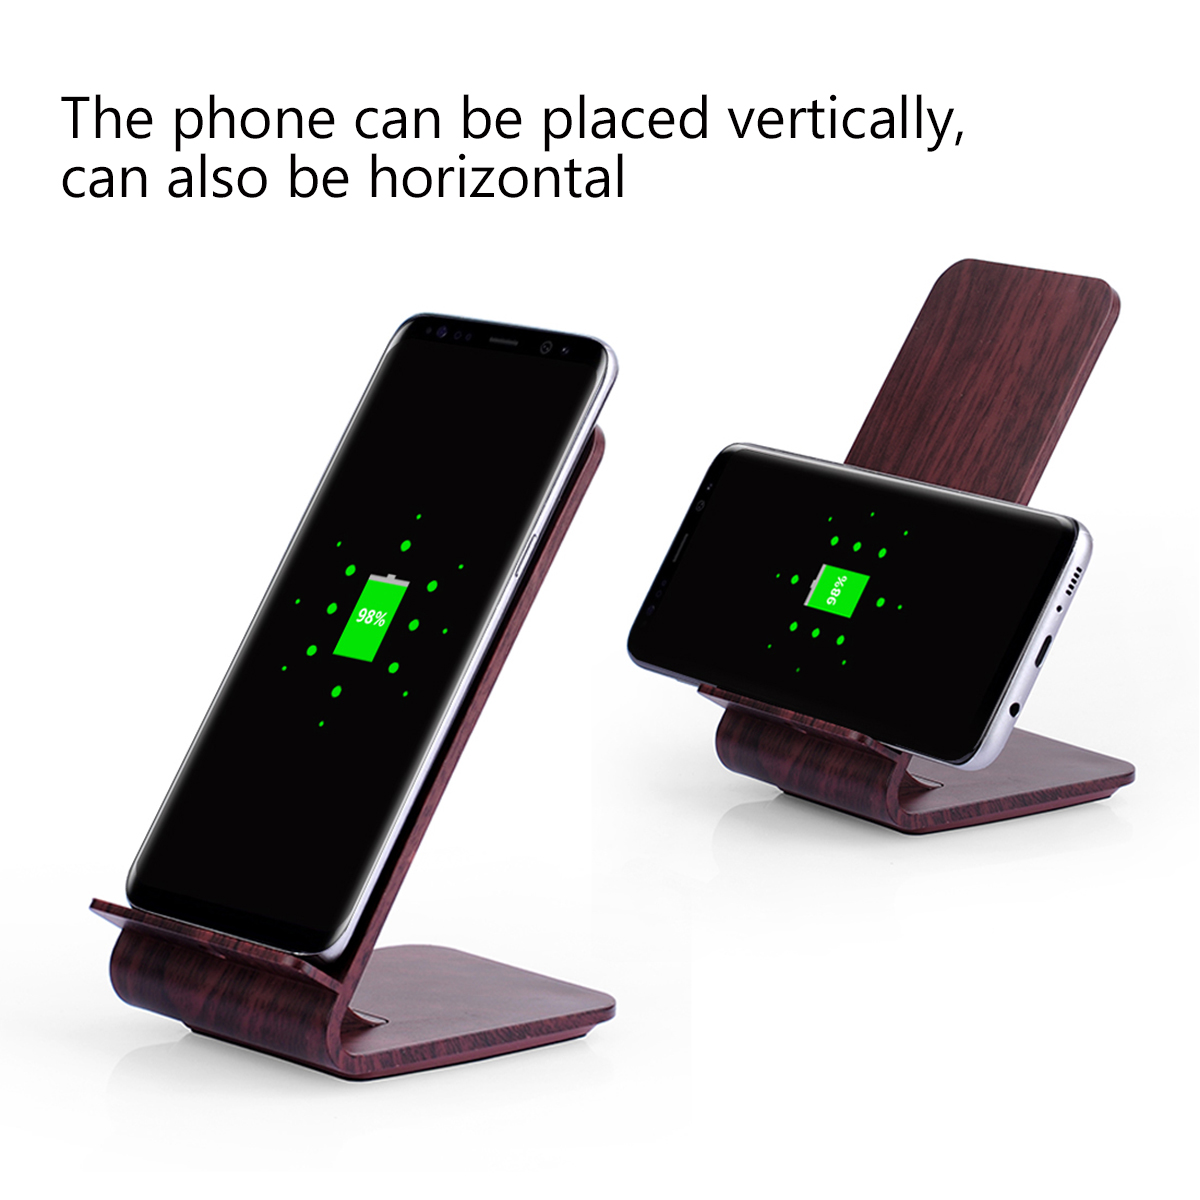 Bakeey Qi Wooden Wireless Charger Desktop Holder For iPhone X 8 8Plus Samsung S8 S7 Edge Note 8 